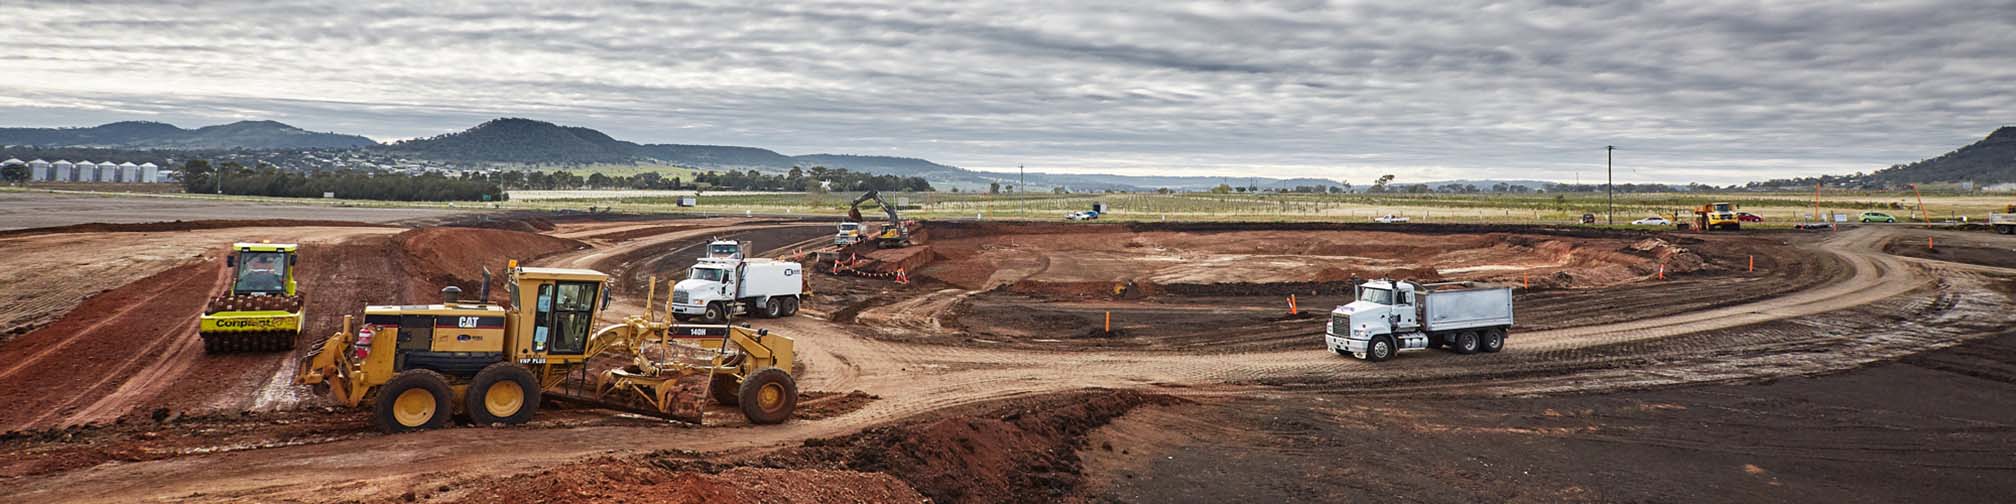 Image for WHALE-SIZED WORKS ON WARREGO HIGHWAY UNDERWAY